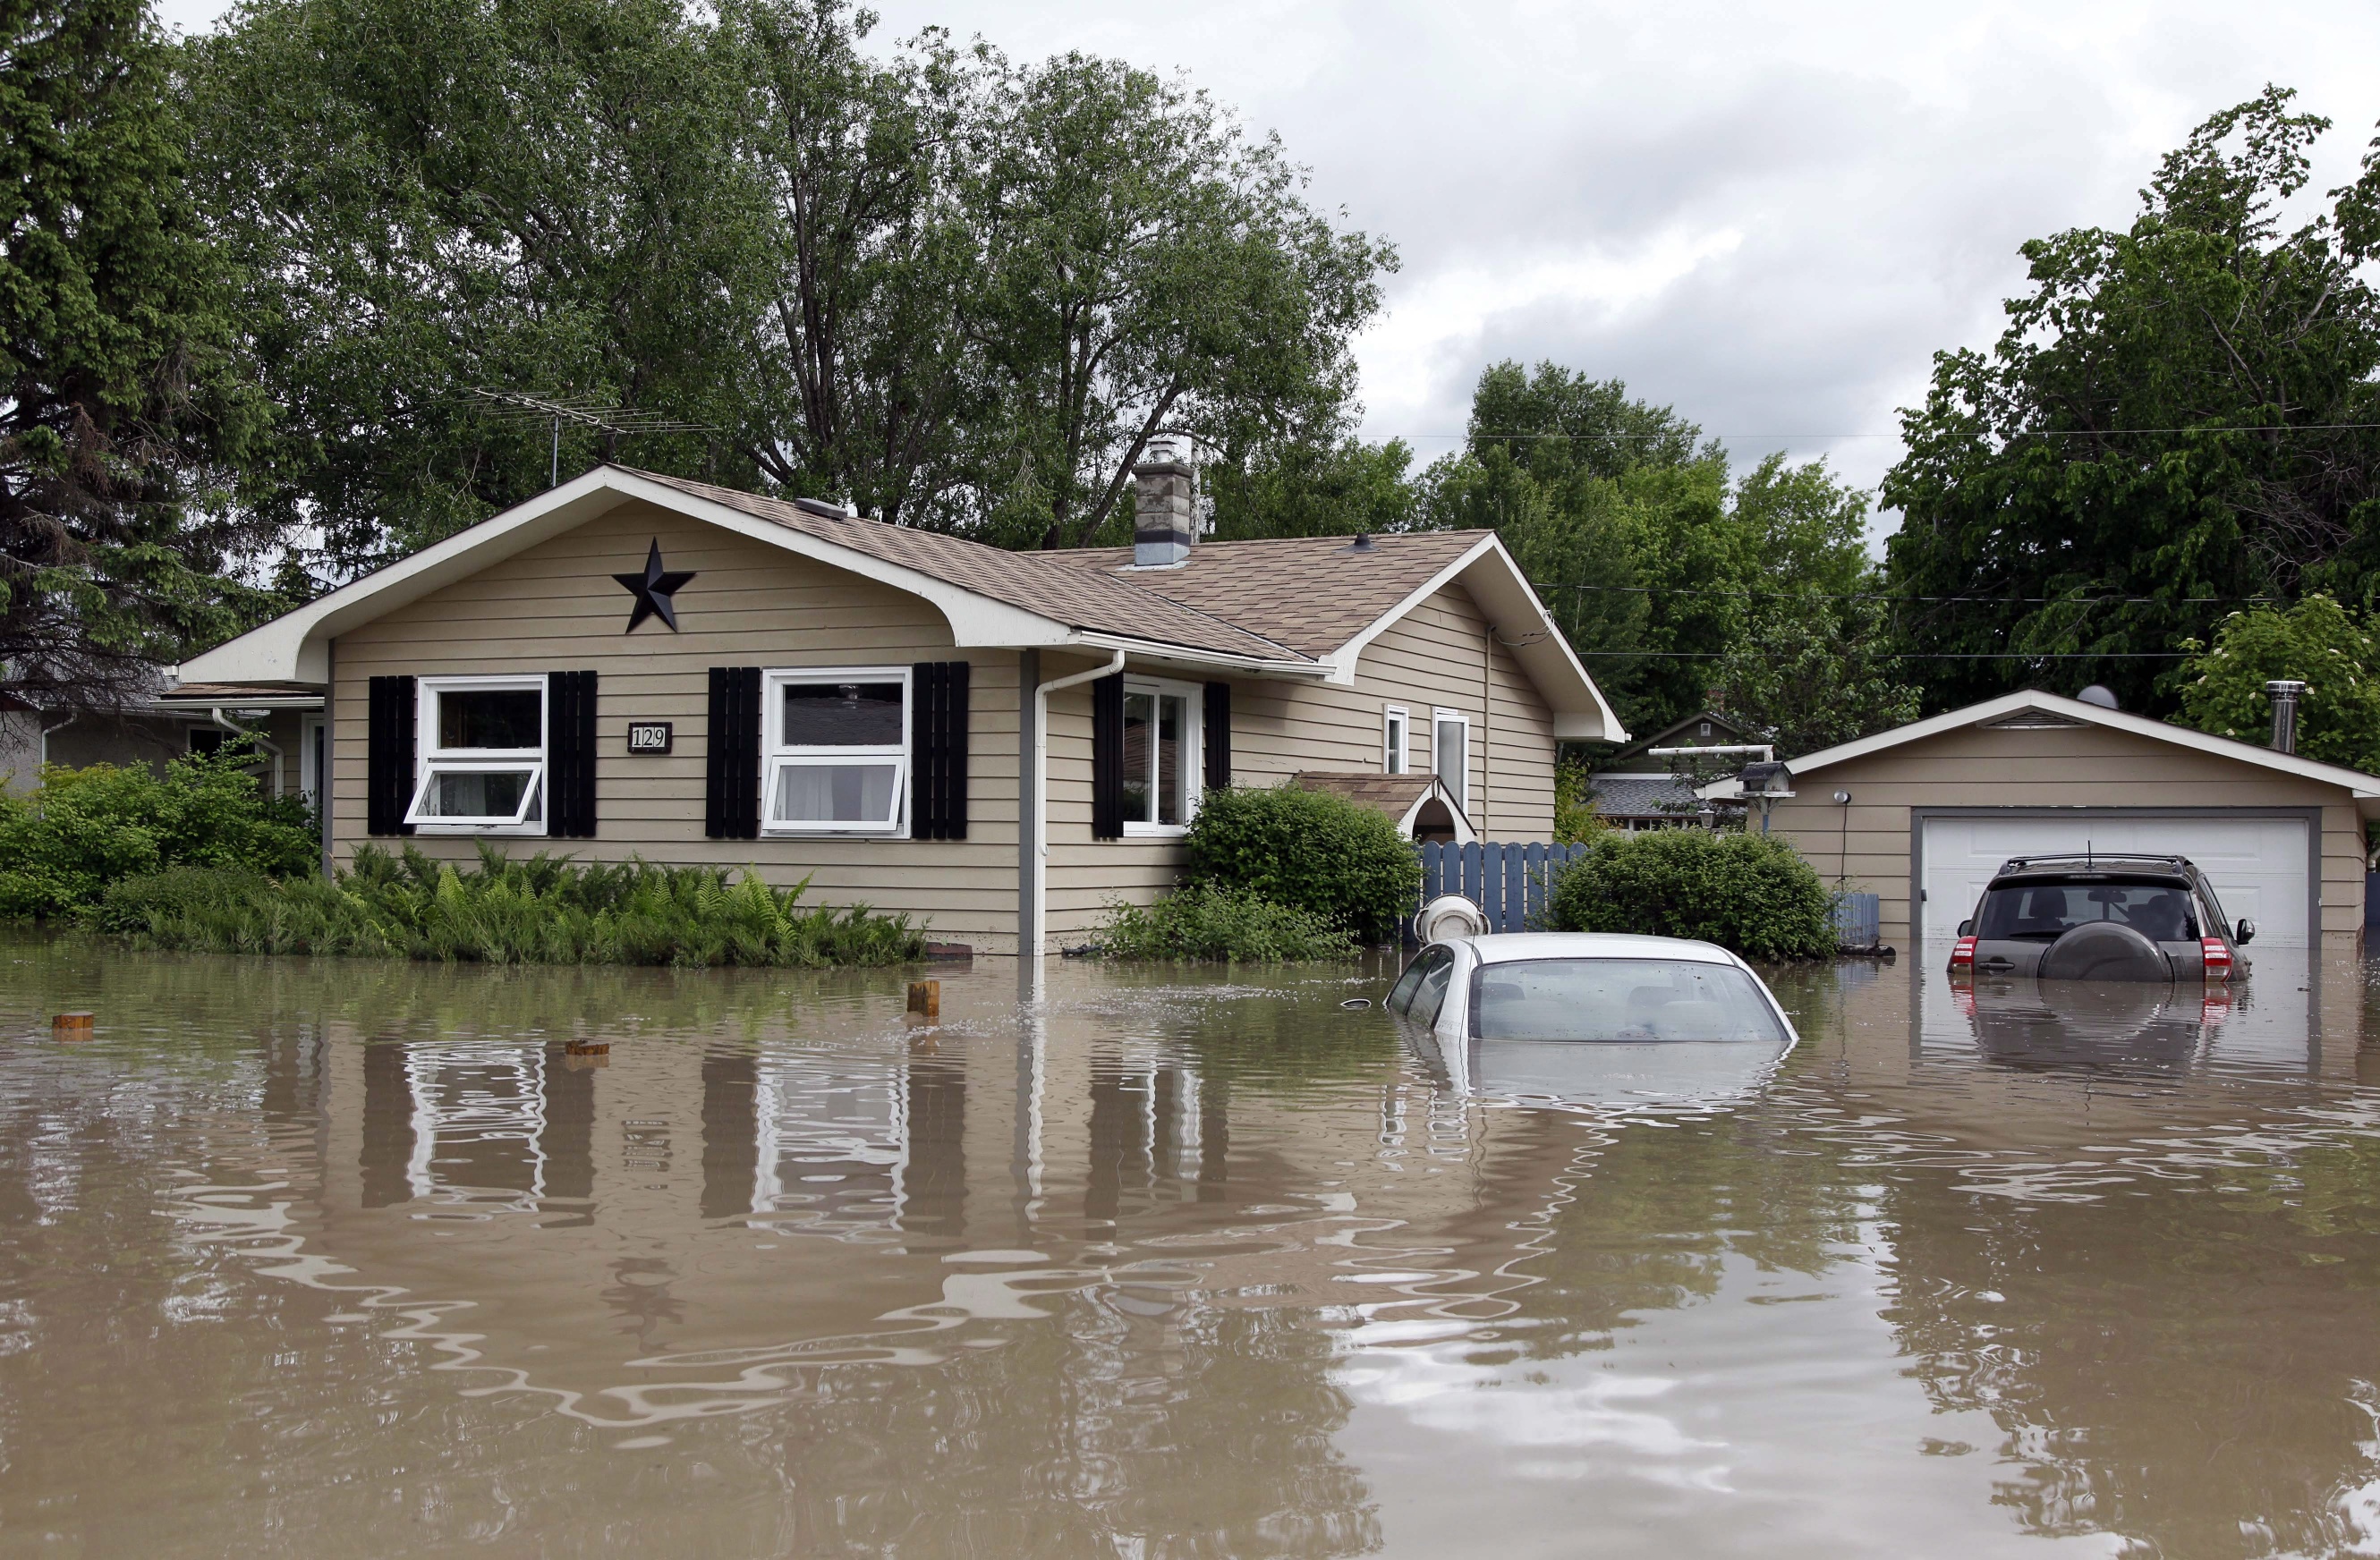 Cars and homes are submerged in flood waters in High River, Alberta. Calgary city officials say as many as 100,000 people could be forced from their homes due to heavy flooding. Photo: AP